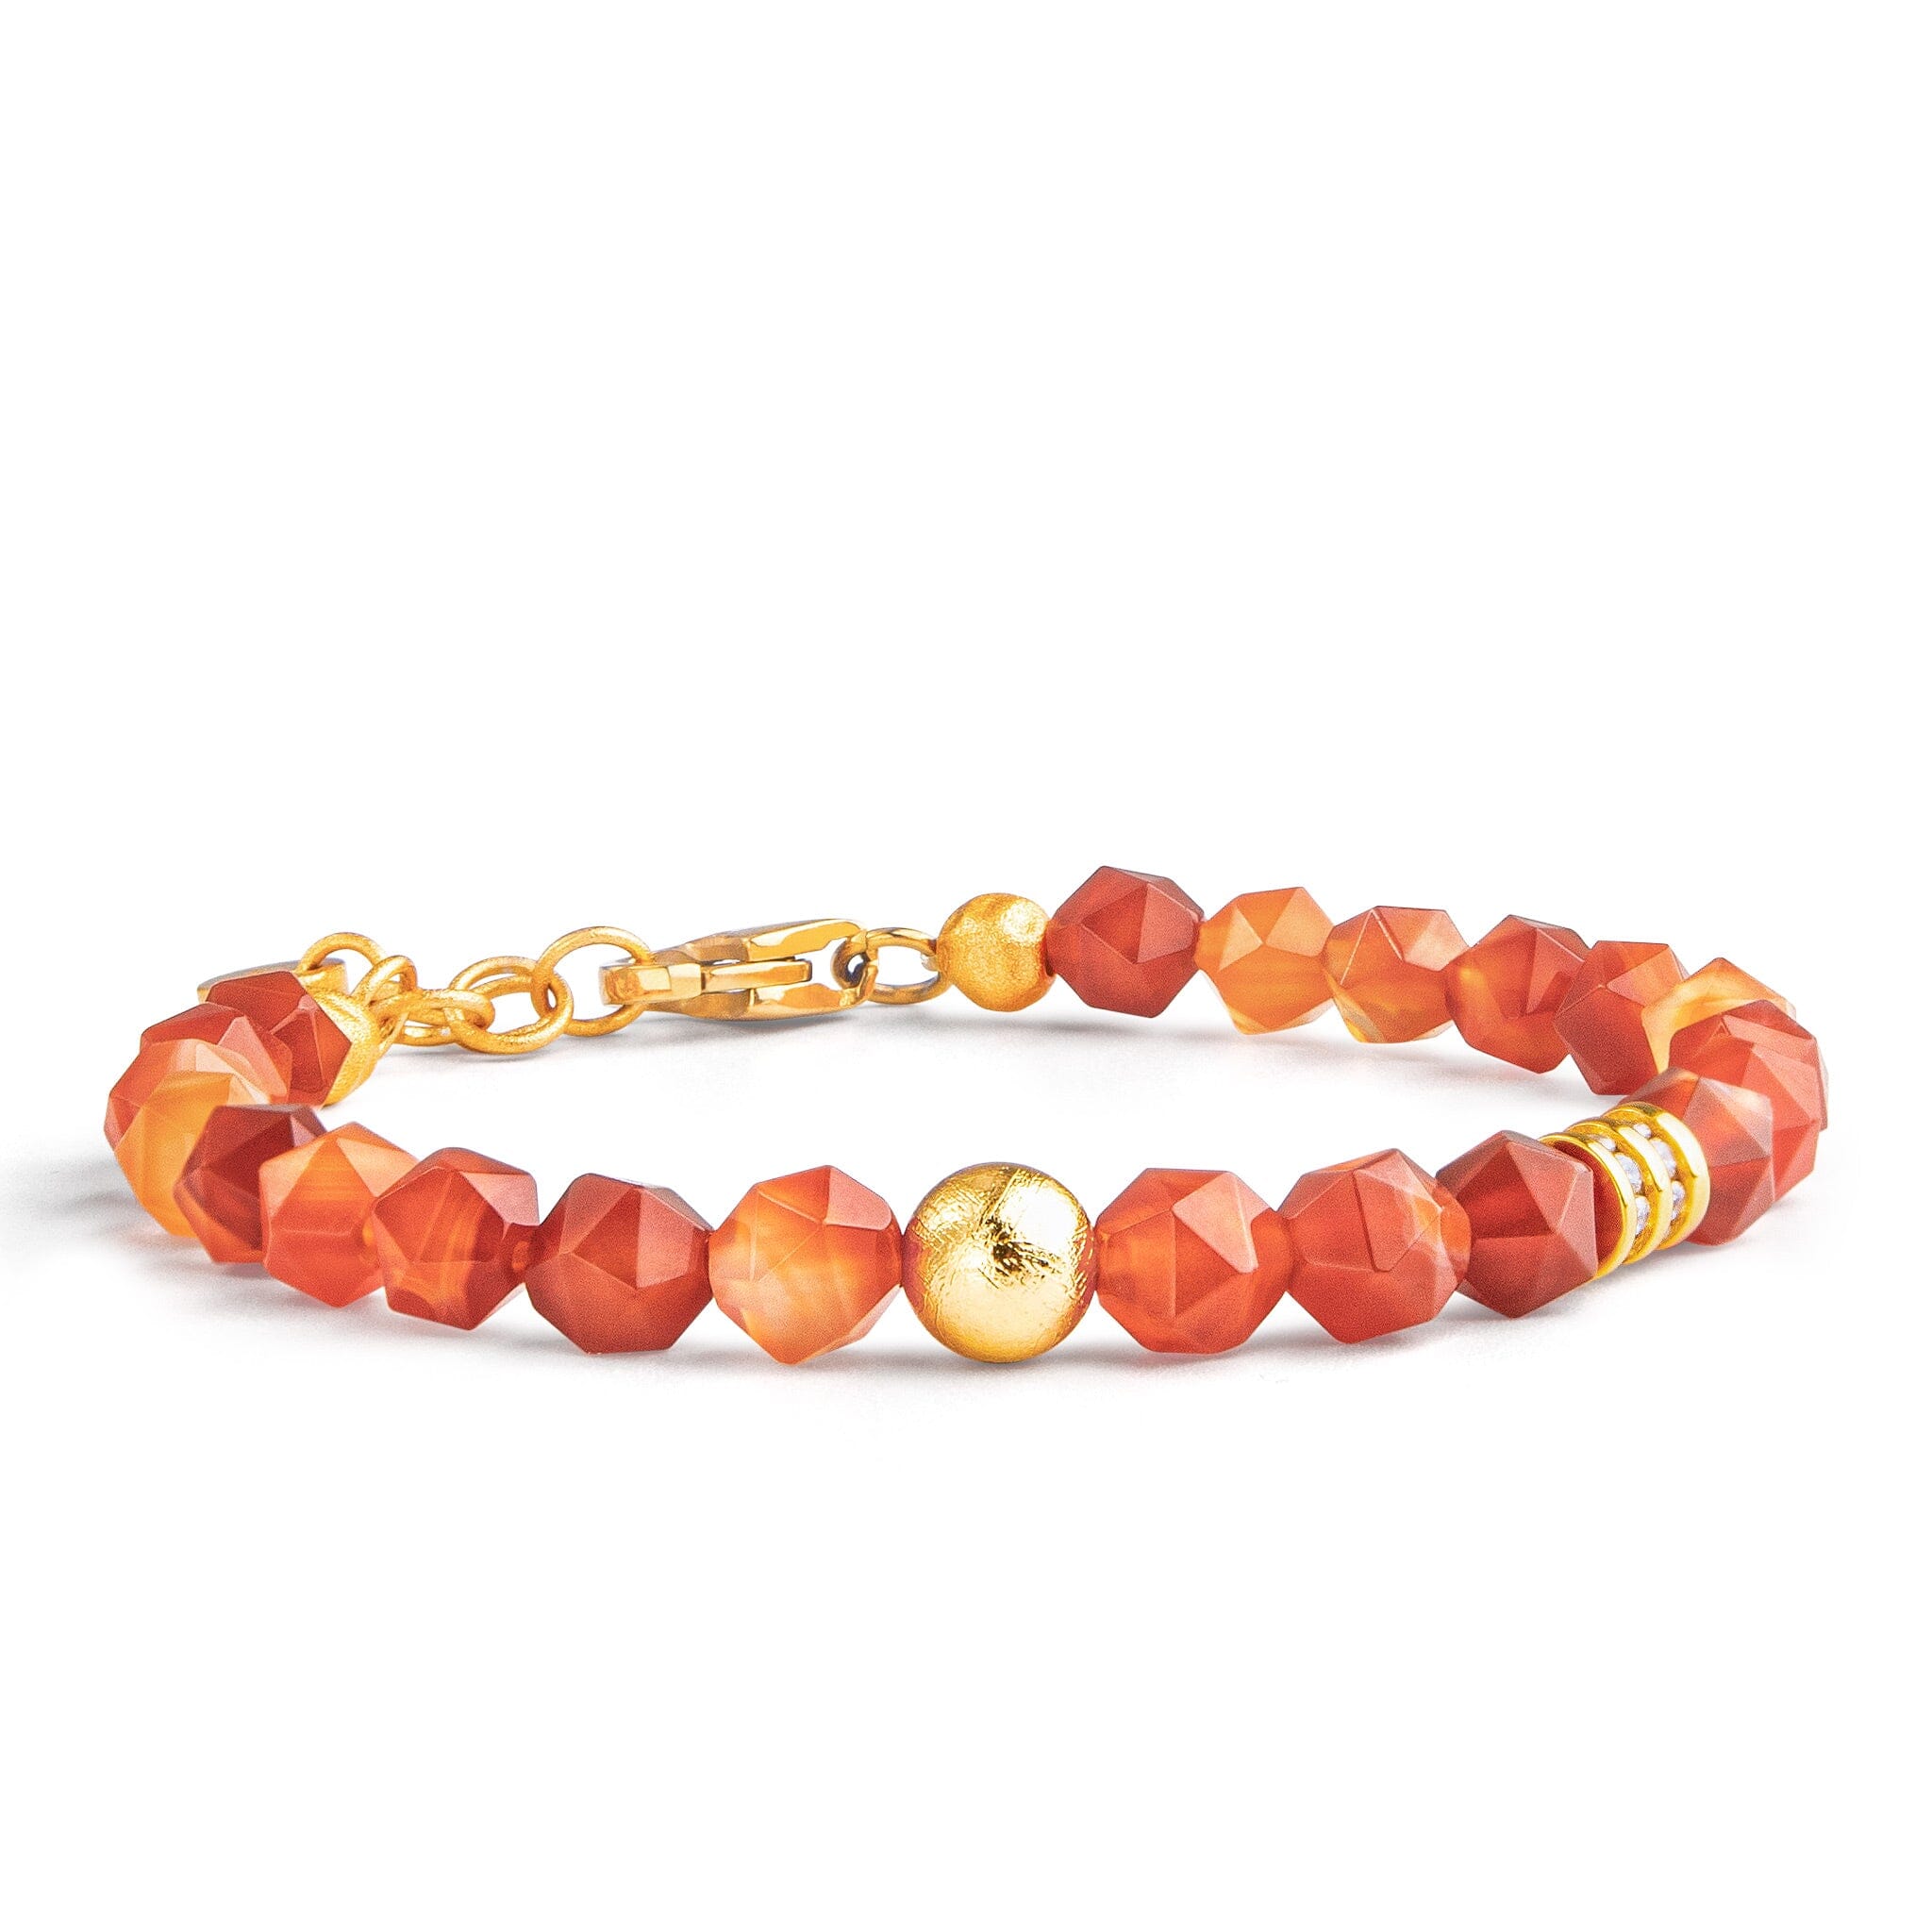 Women's Trammels Stacked Bracelet with Meteorite and Orange Agate Bracelets WAA FASHION GROUP 